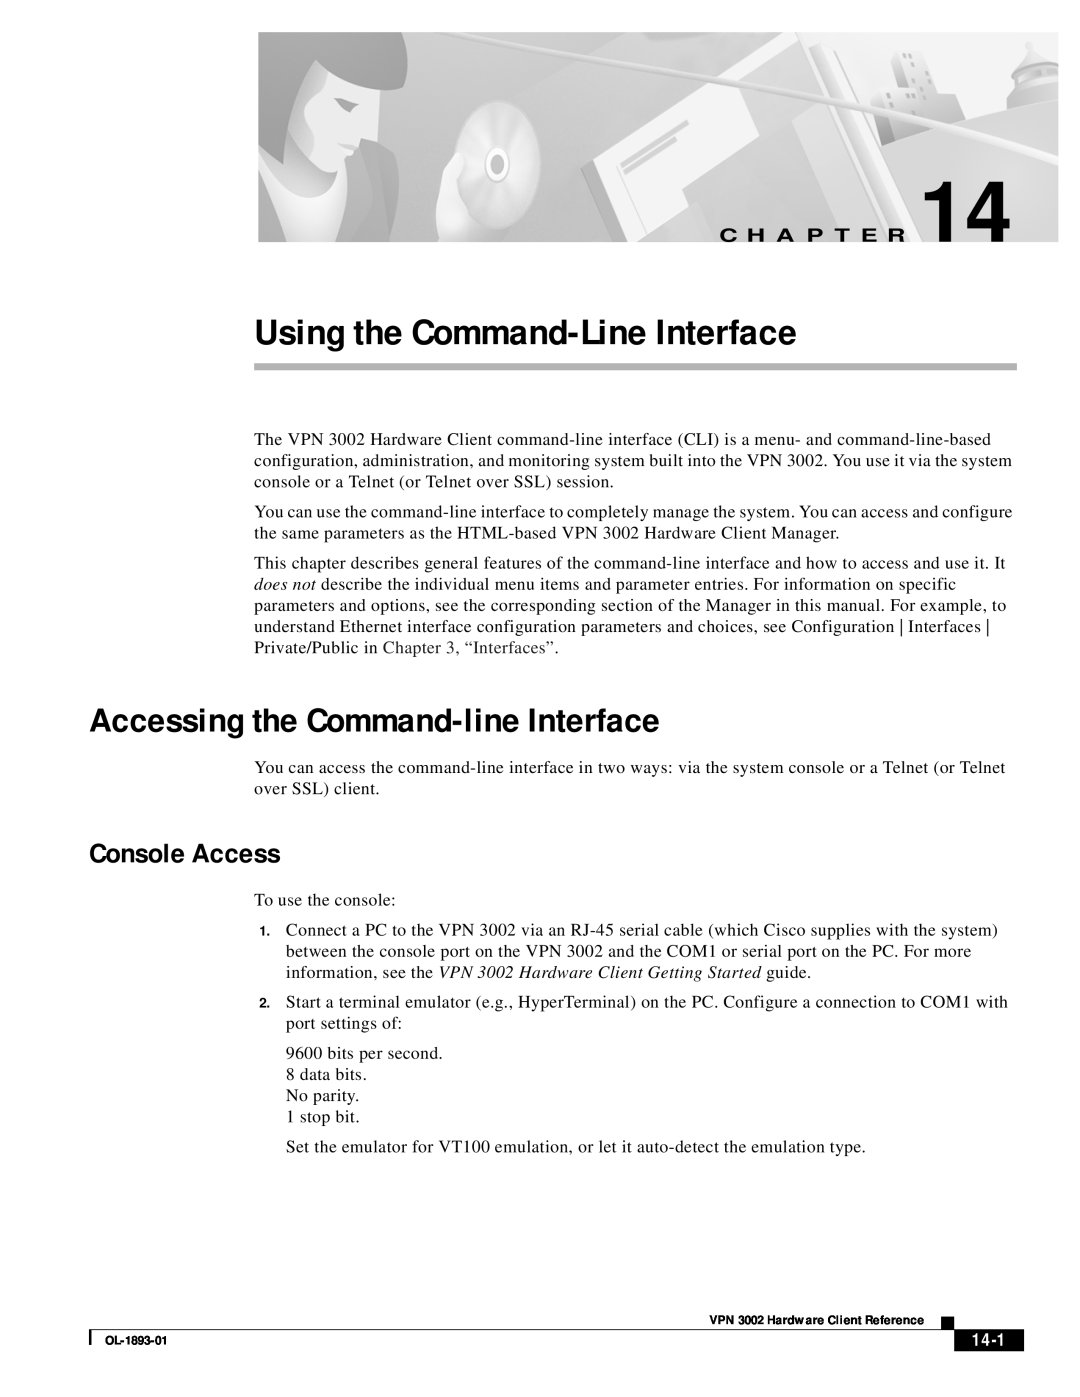 Cisco Systems VPN 3002 manual Using the Command-LineInterface, Accessing the Command-lineInterface, Console Access, 14-1 